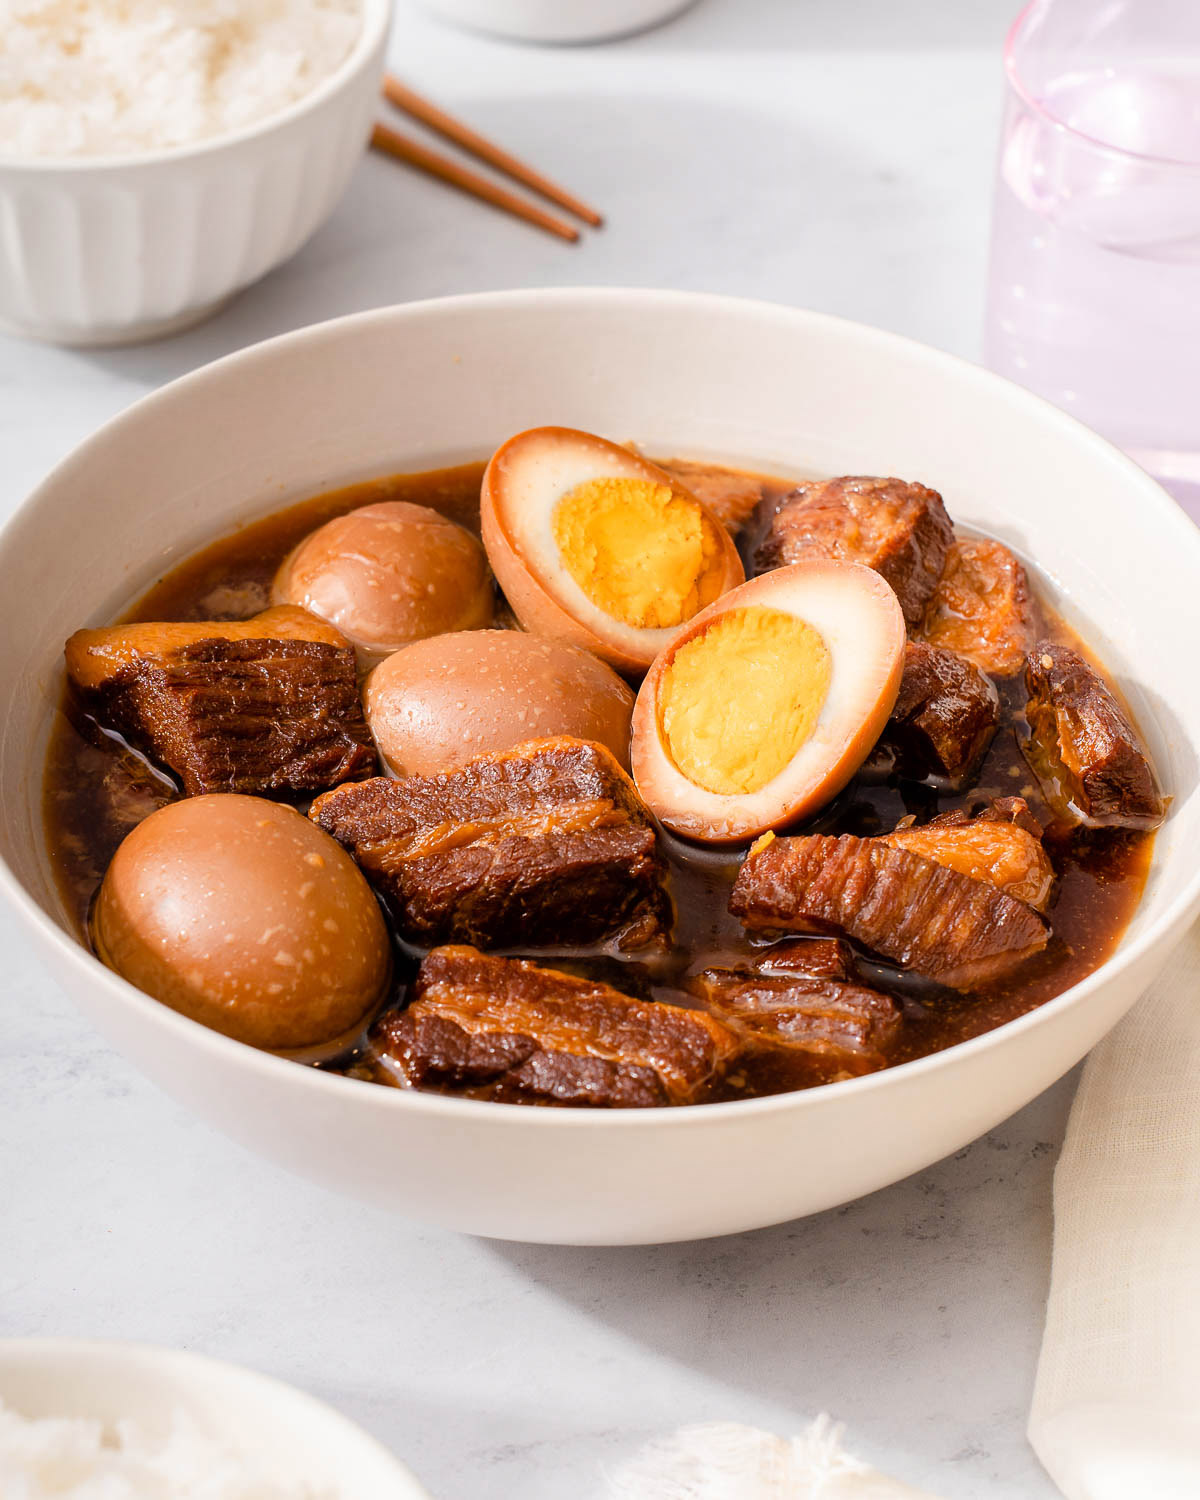 A bowl of Vietnamese braised pork belly and eggs on a table.